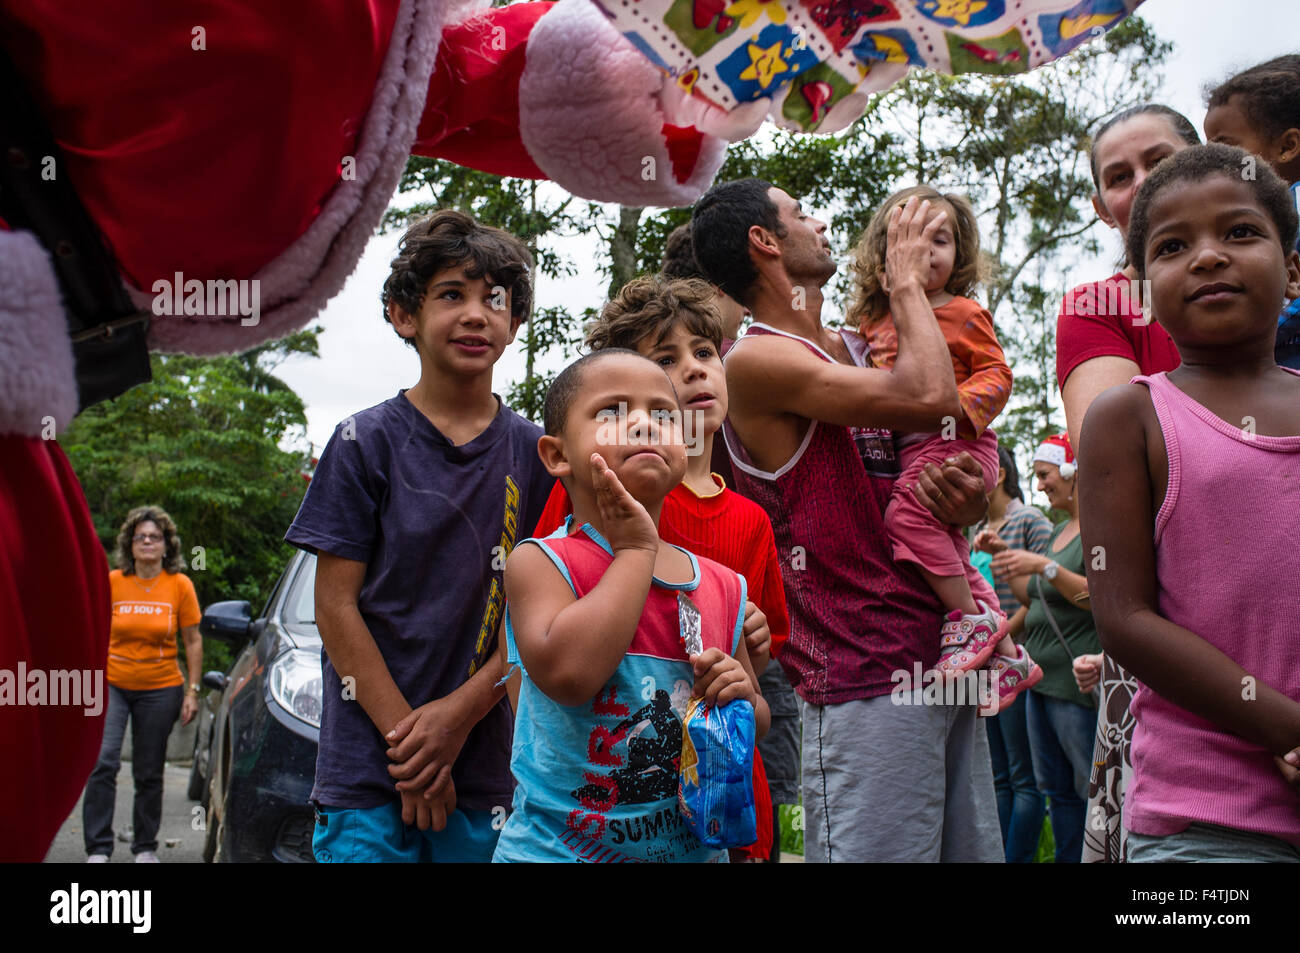 Man dresses up as Santa Claus for visiting poor districts and distributing gifts to children at Christmas. Nova Friburgo city, Rio de Janeiro state, Brazil. Stock Photo